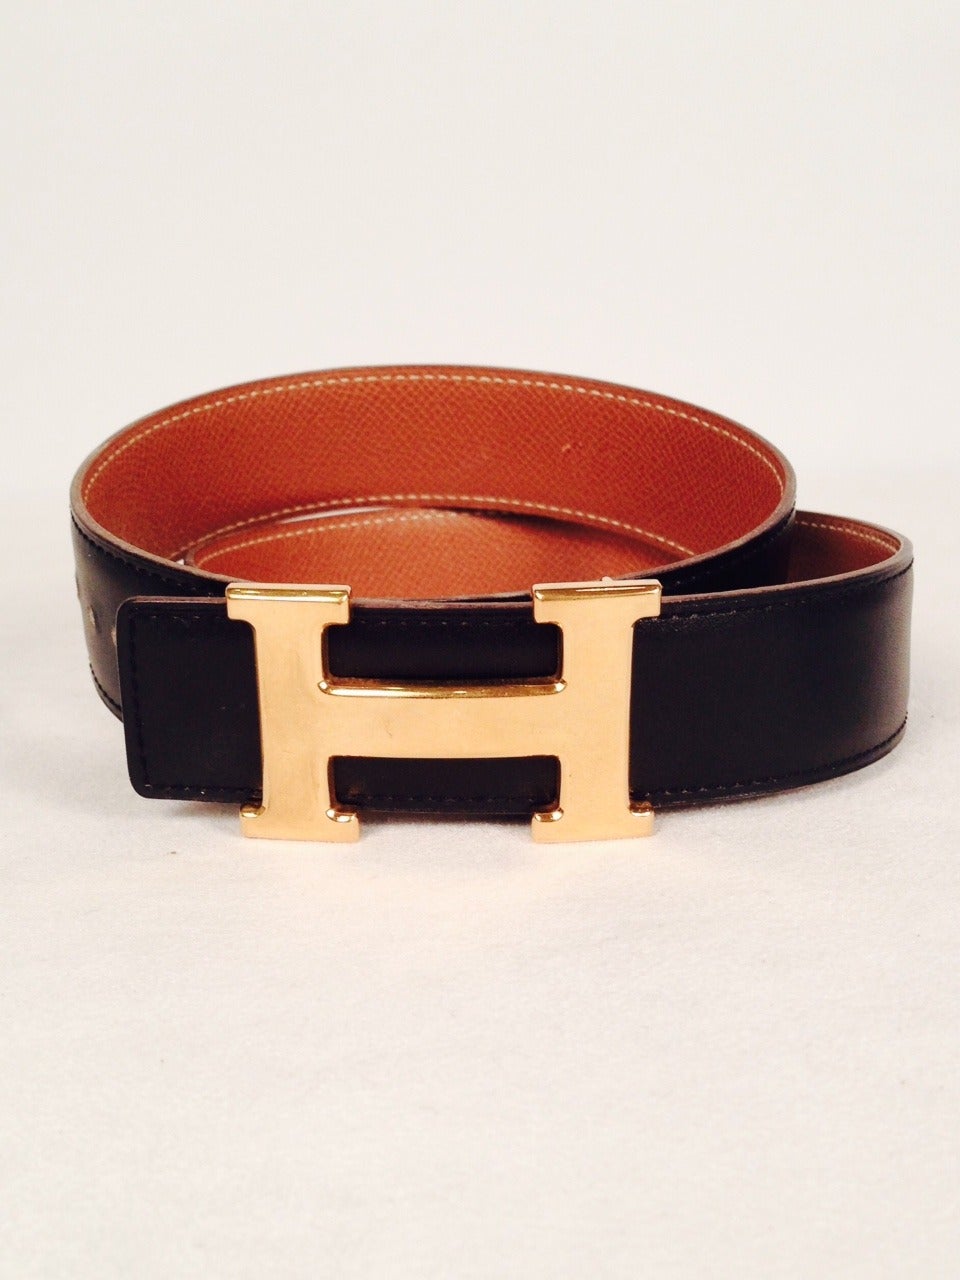 Hermes Reversible Belt With Large Constance Gold Tone Buckle In Good Condition For Sale In Palm Beach, FL